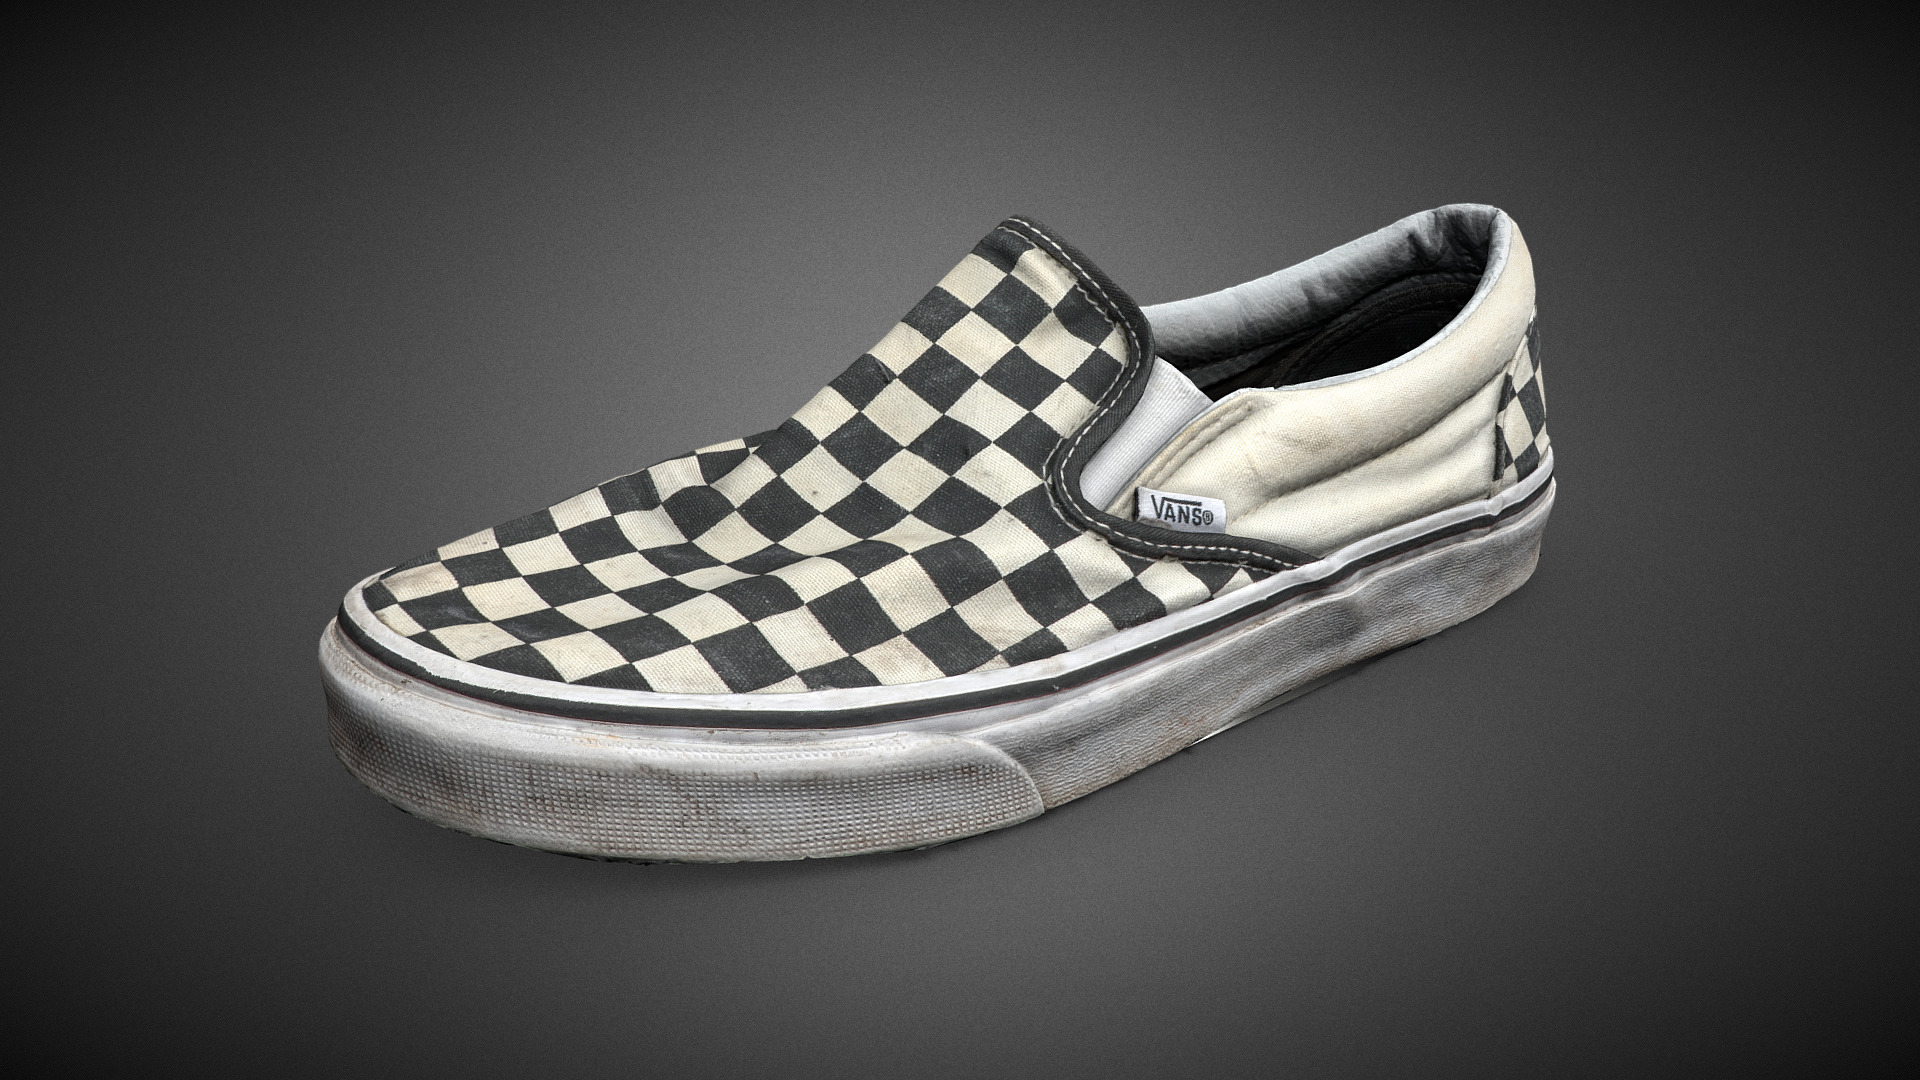 3D model VANS Classic Slip On Toile Damier - This is a 3D model of the VANS Classic Slip On Toile Damier. The 3D model is about a black and white shoe.